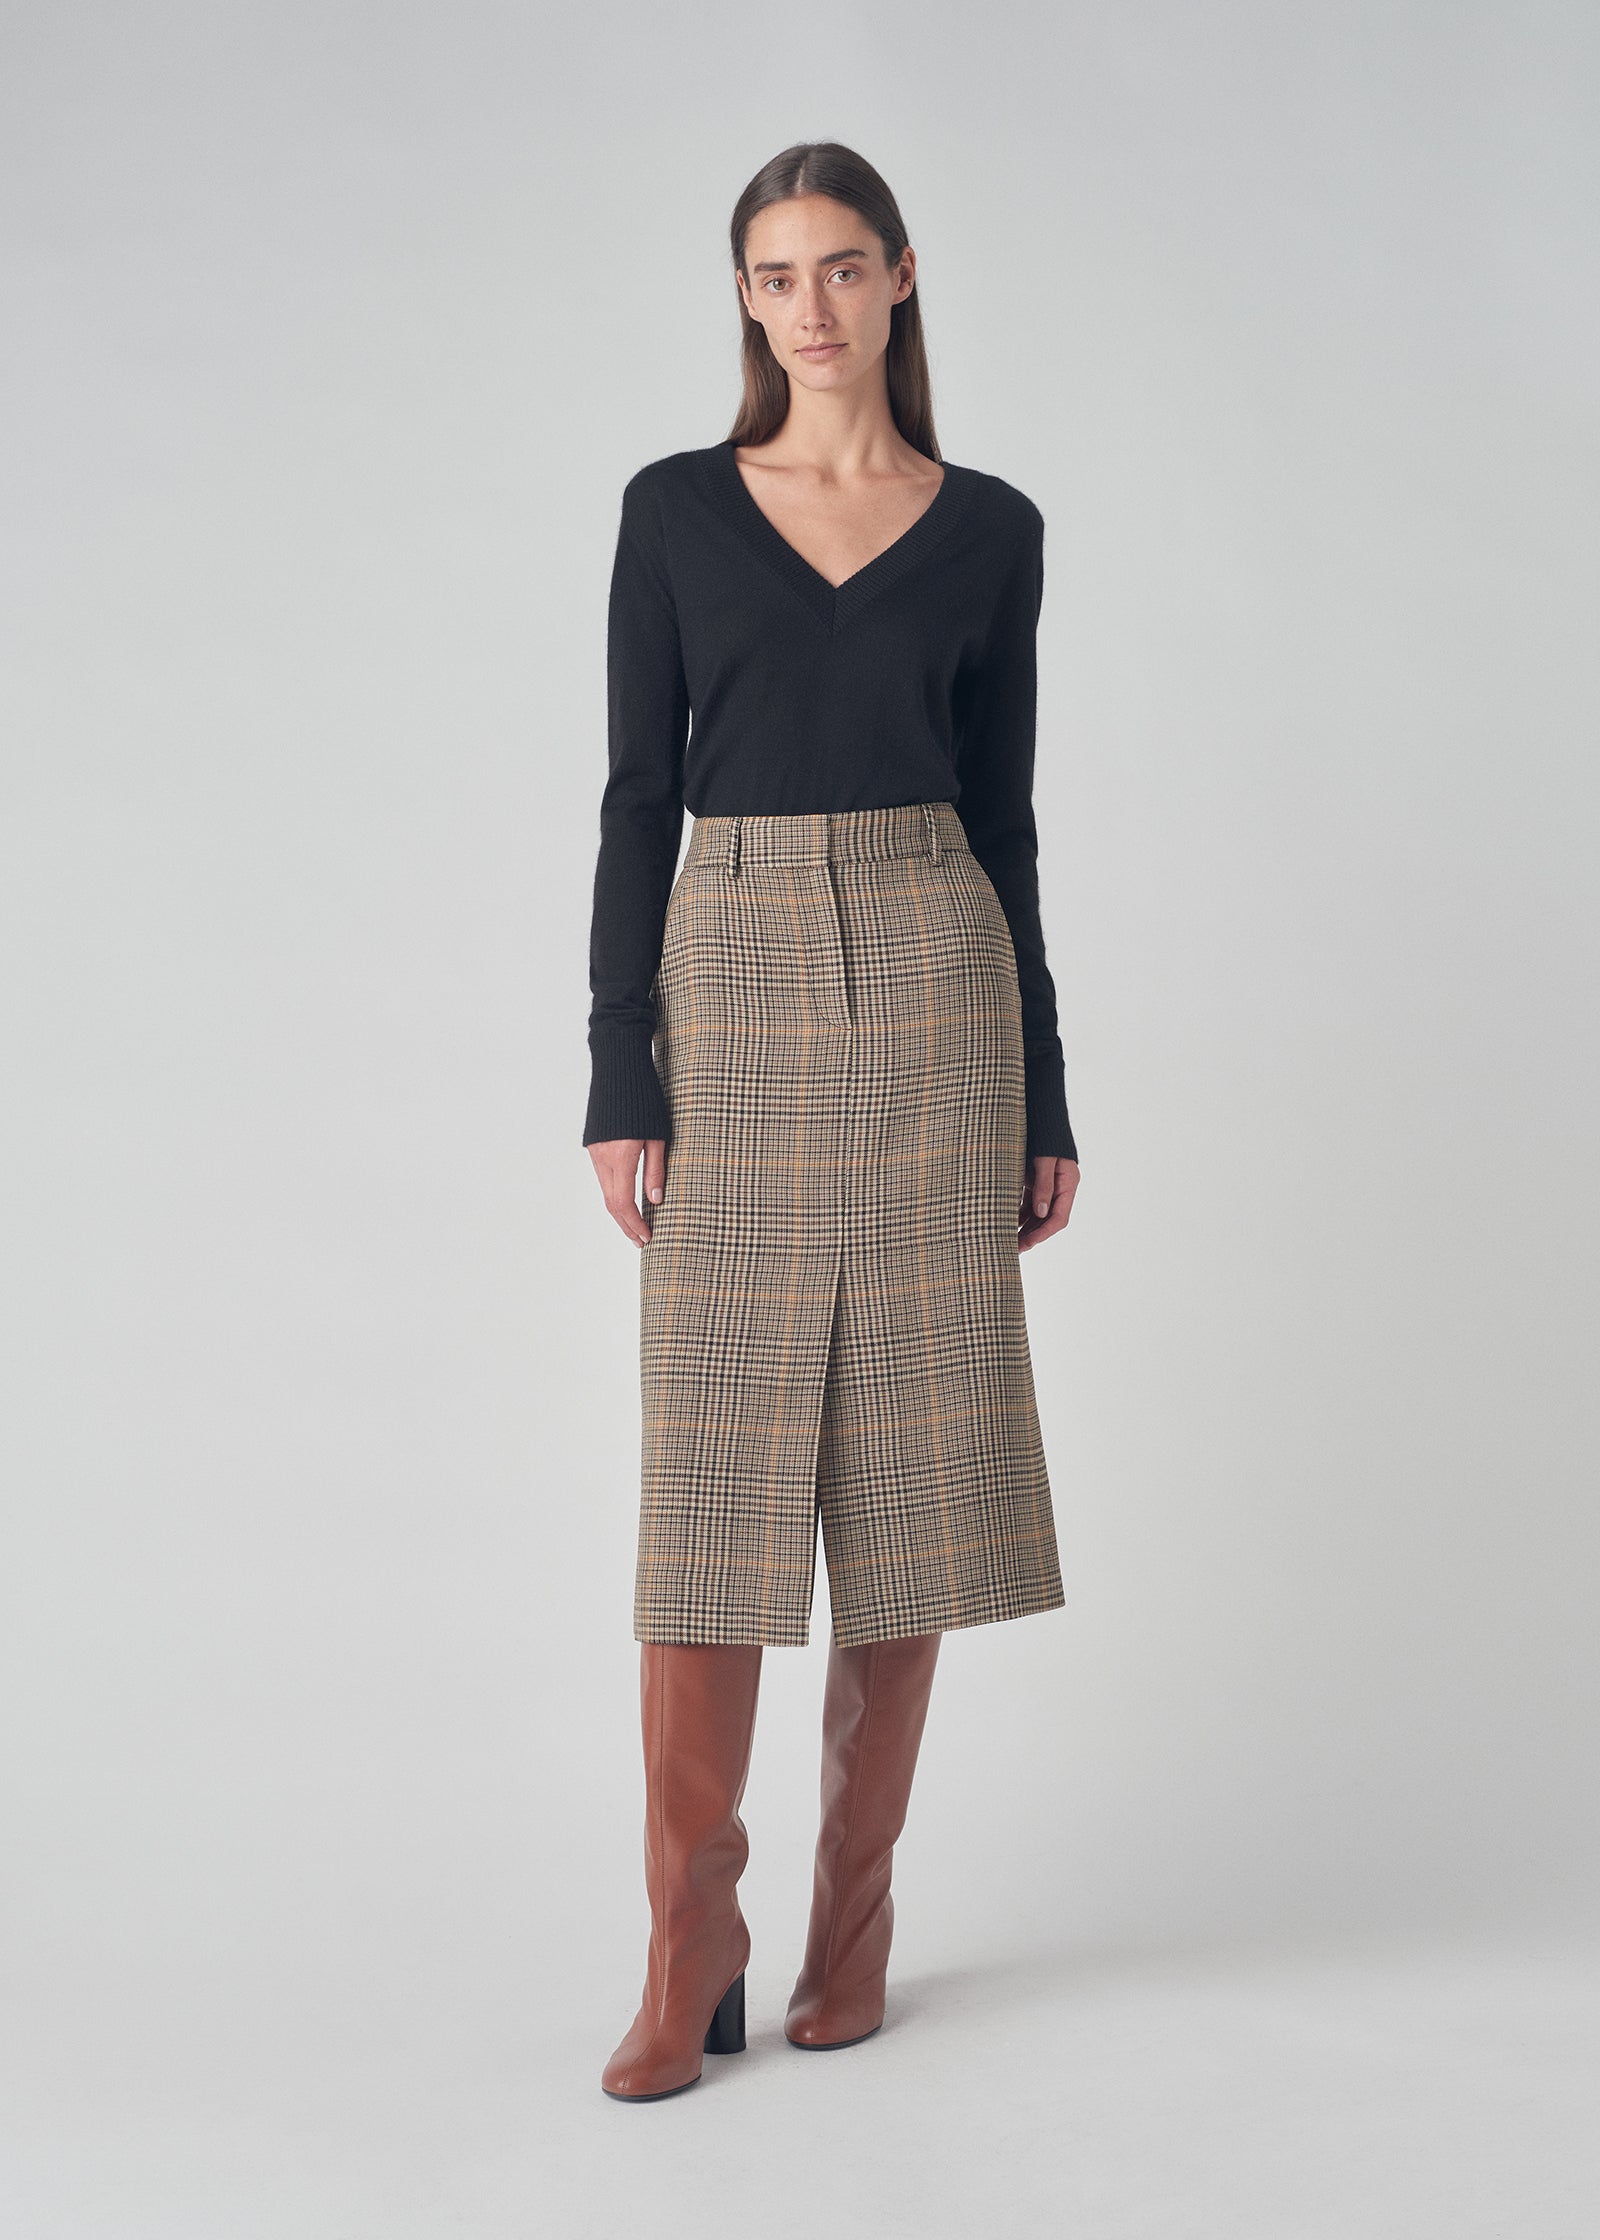 Midi Pencil Skirt in Lightweight Tweed - Brown Plaid - CO Collections